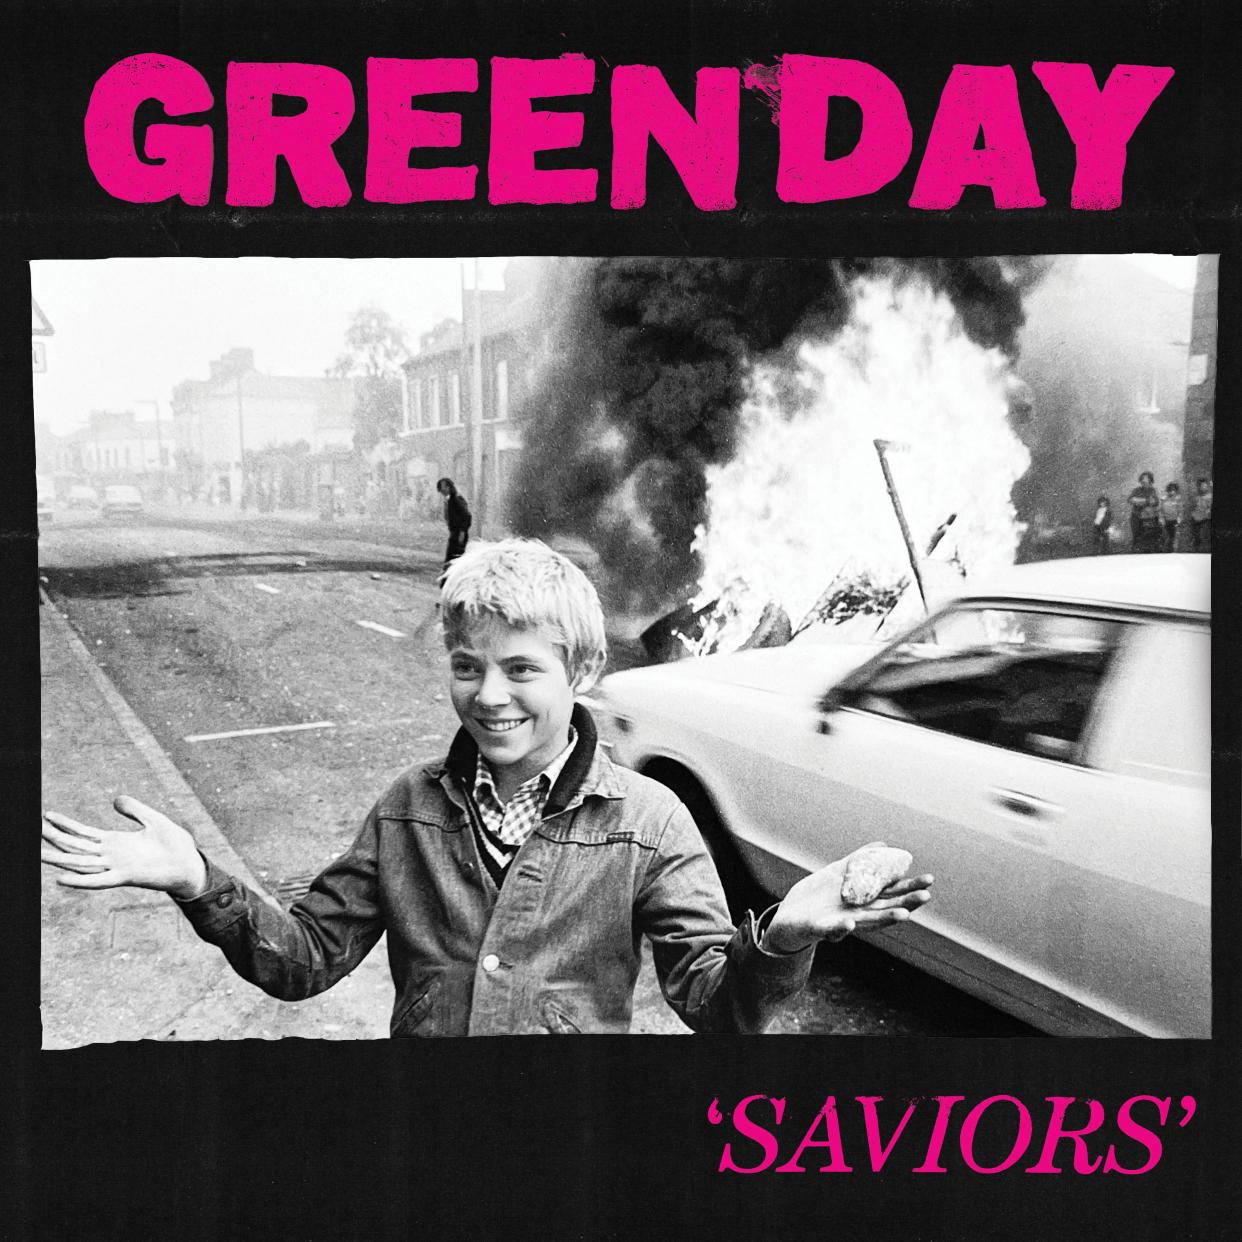 The cover of "Saviors" depicts a young man, Paul Kennedy, in Belfast, Ireland in 1978 during the Troubles, the 30-year conflict in Northern Ireland between Protestants and Roman Catholics.